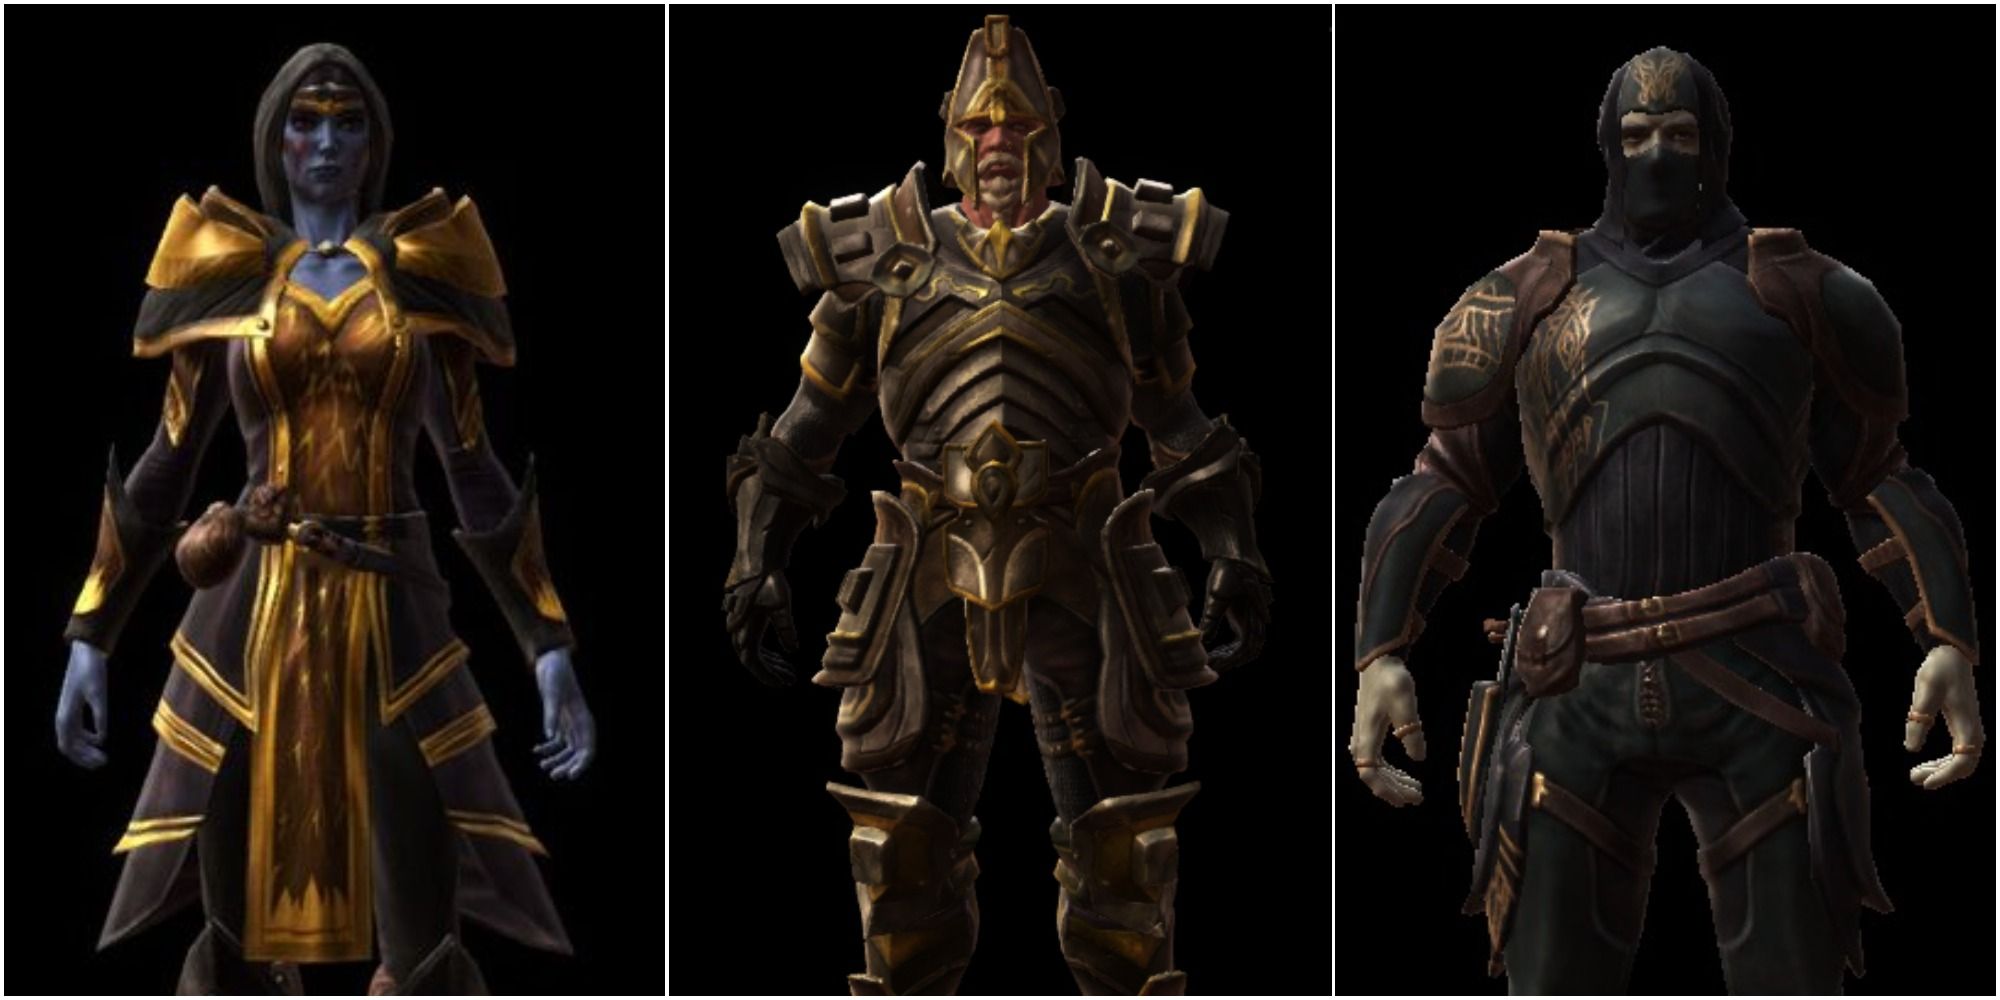 Kingdoms of Amalur Re-Reckoning the Lachlan's Armour set on the left, the Crucible Armour set in the middle and the Justice Armour set on the right